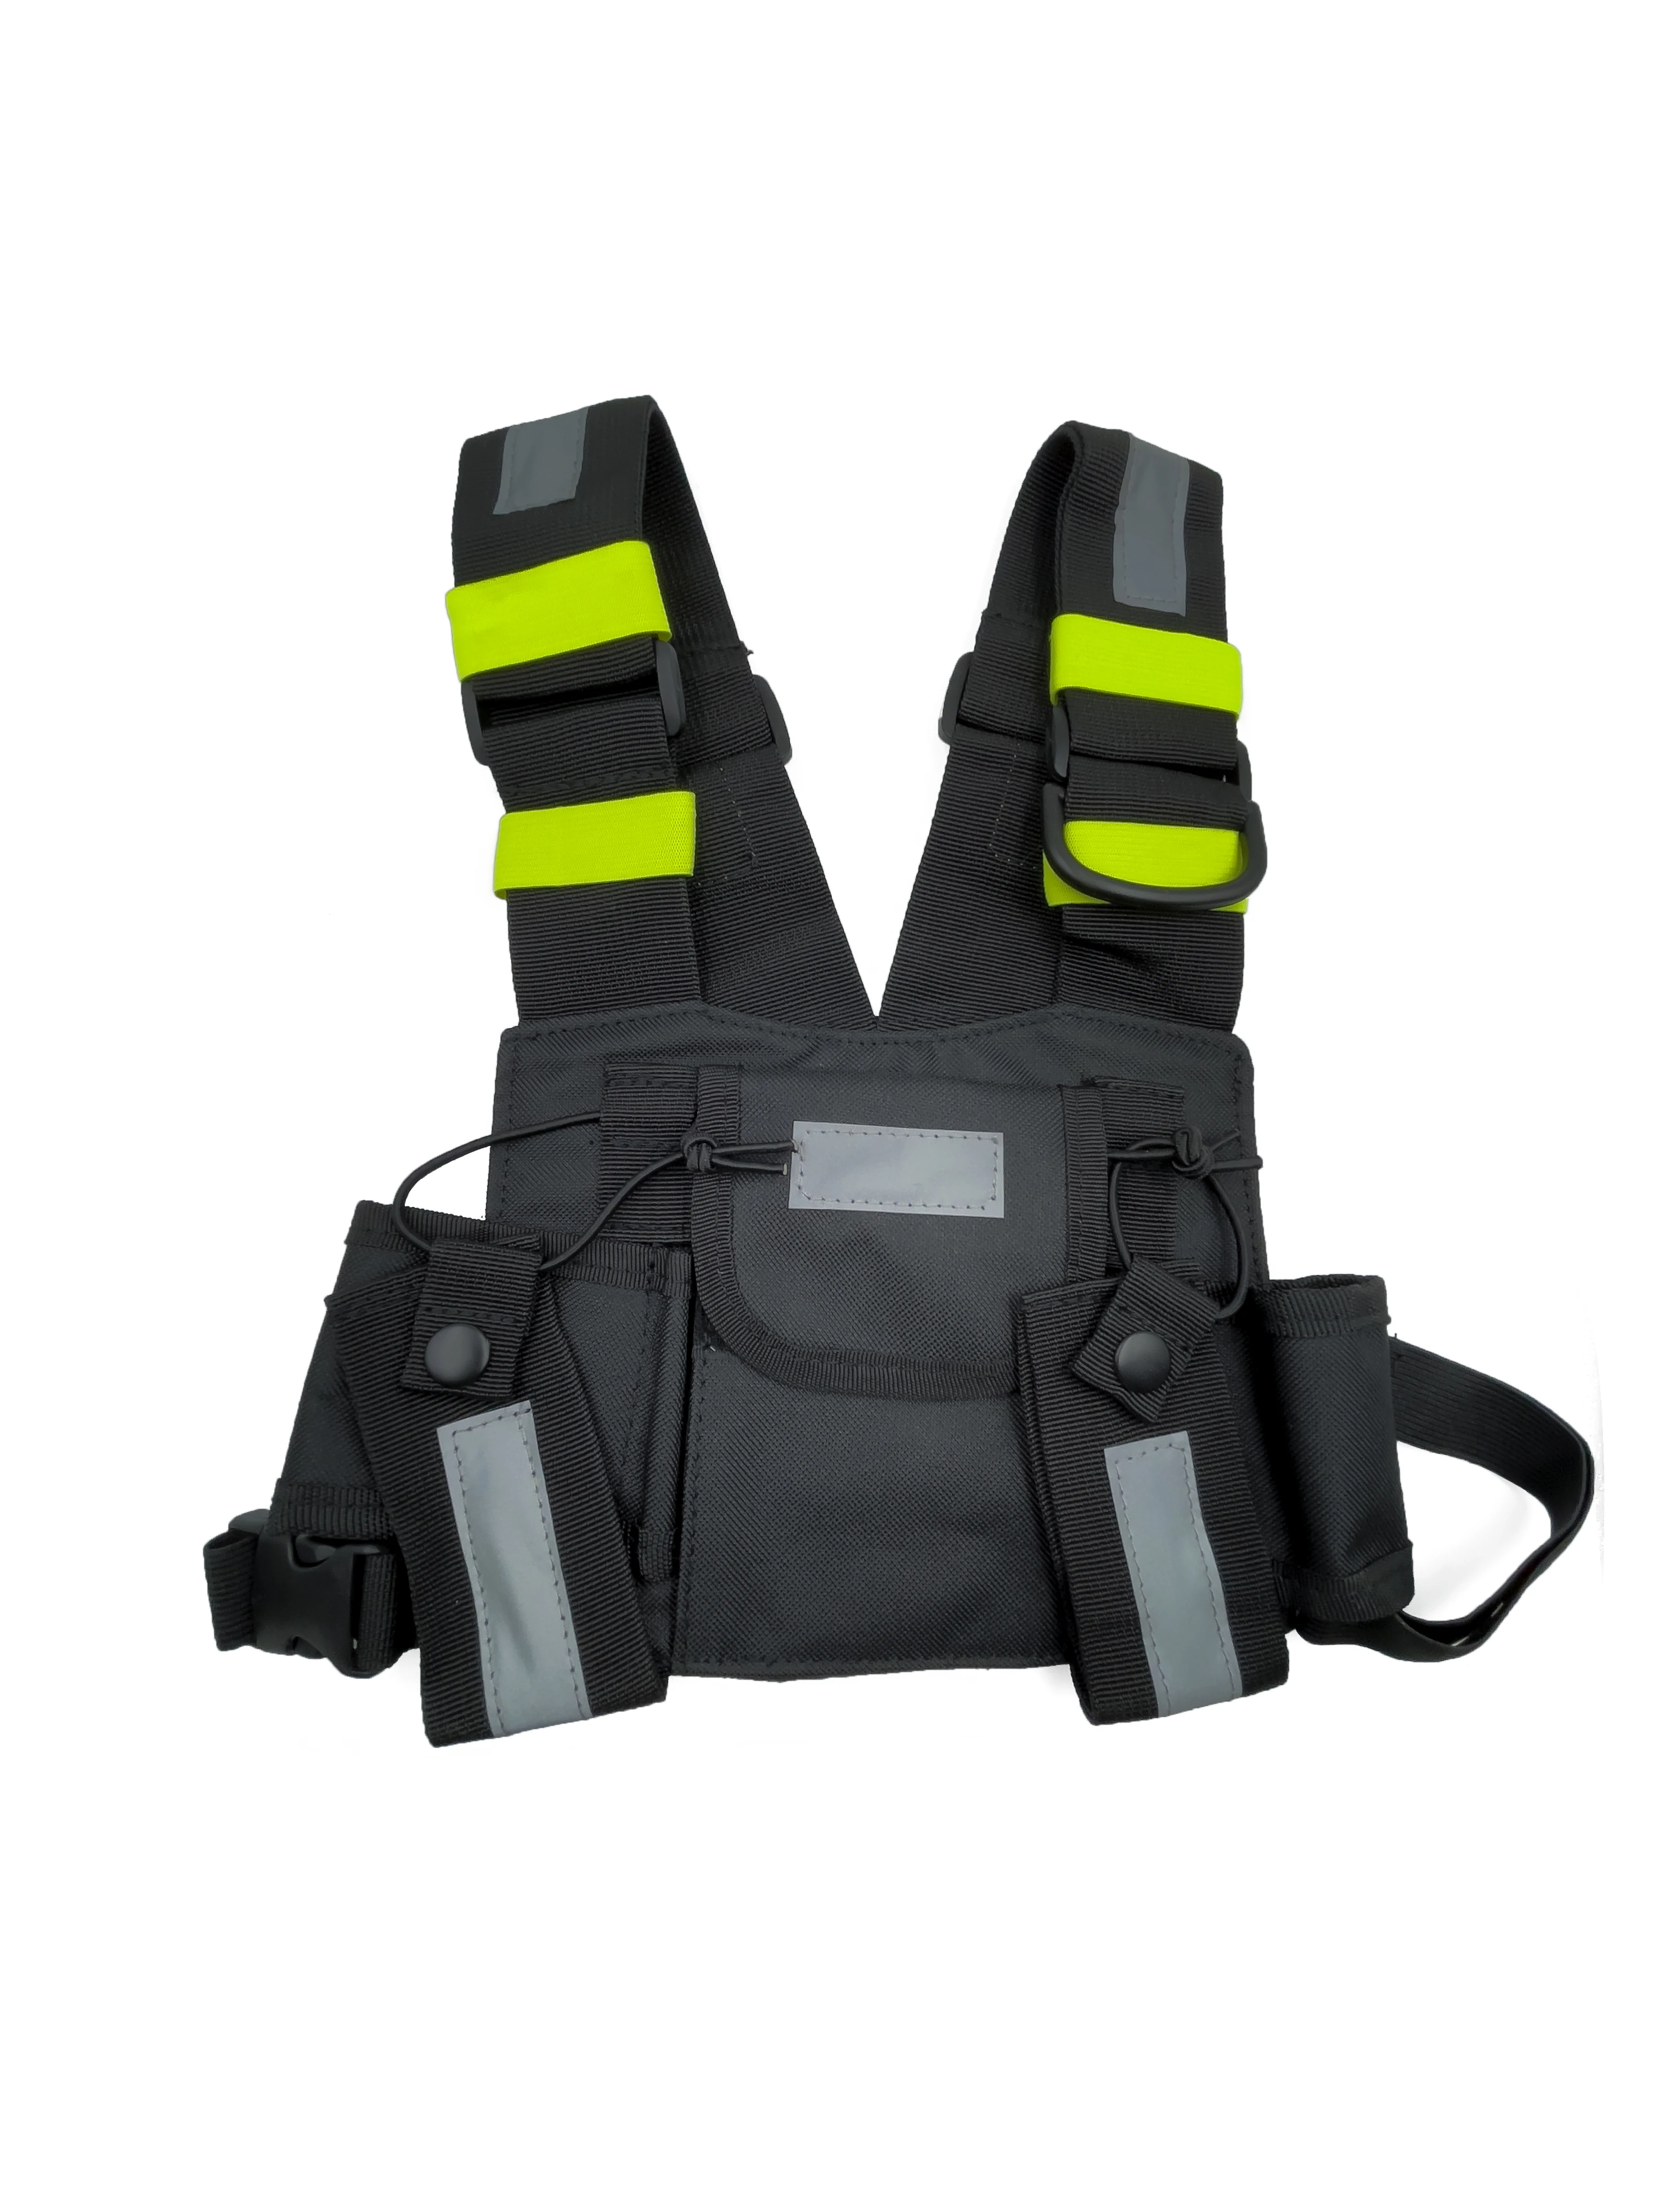 

Shoulder Holster Two Way Radio Reflective Chest Harness Holder Bag Vest Rig Walkie Talkies Front Pack Pouch Case Drop Ship